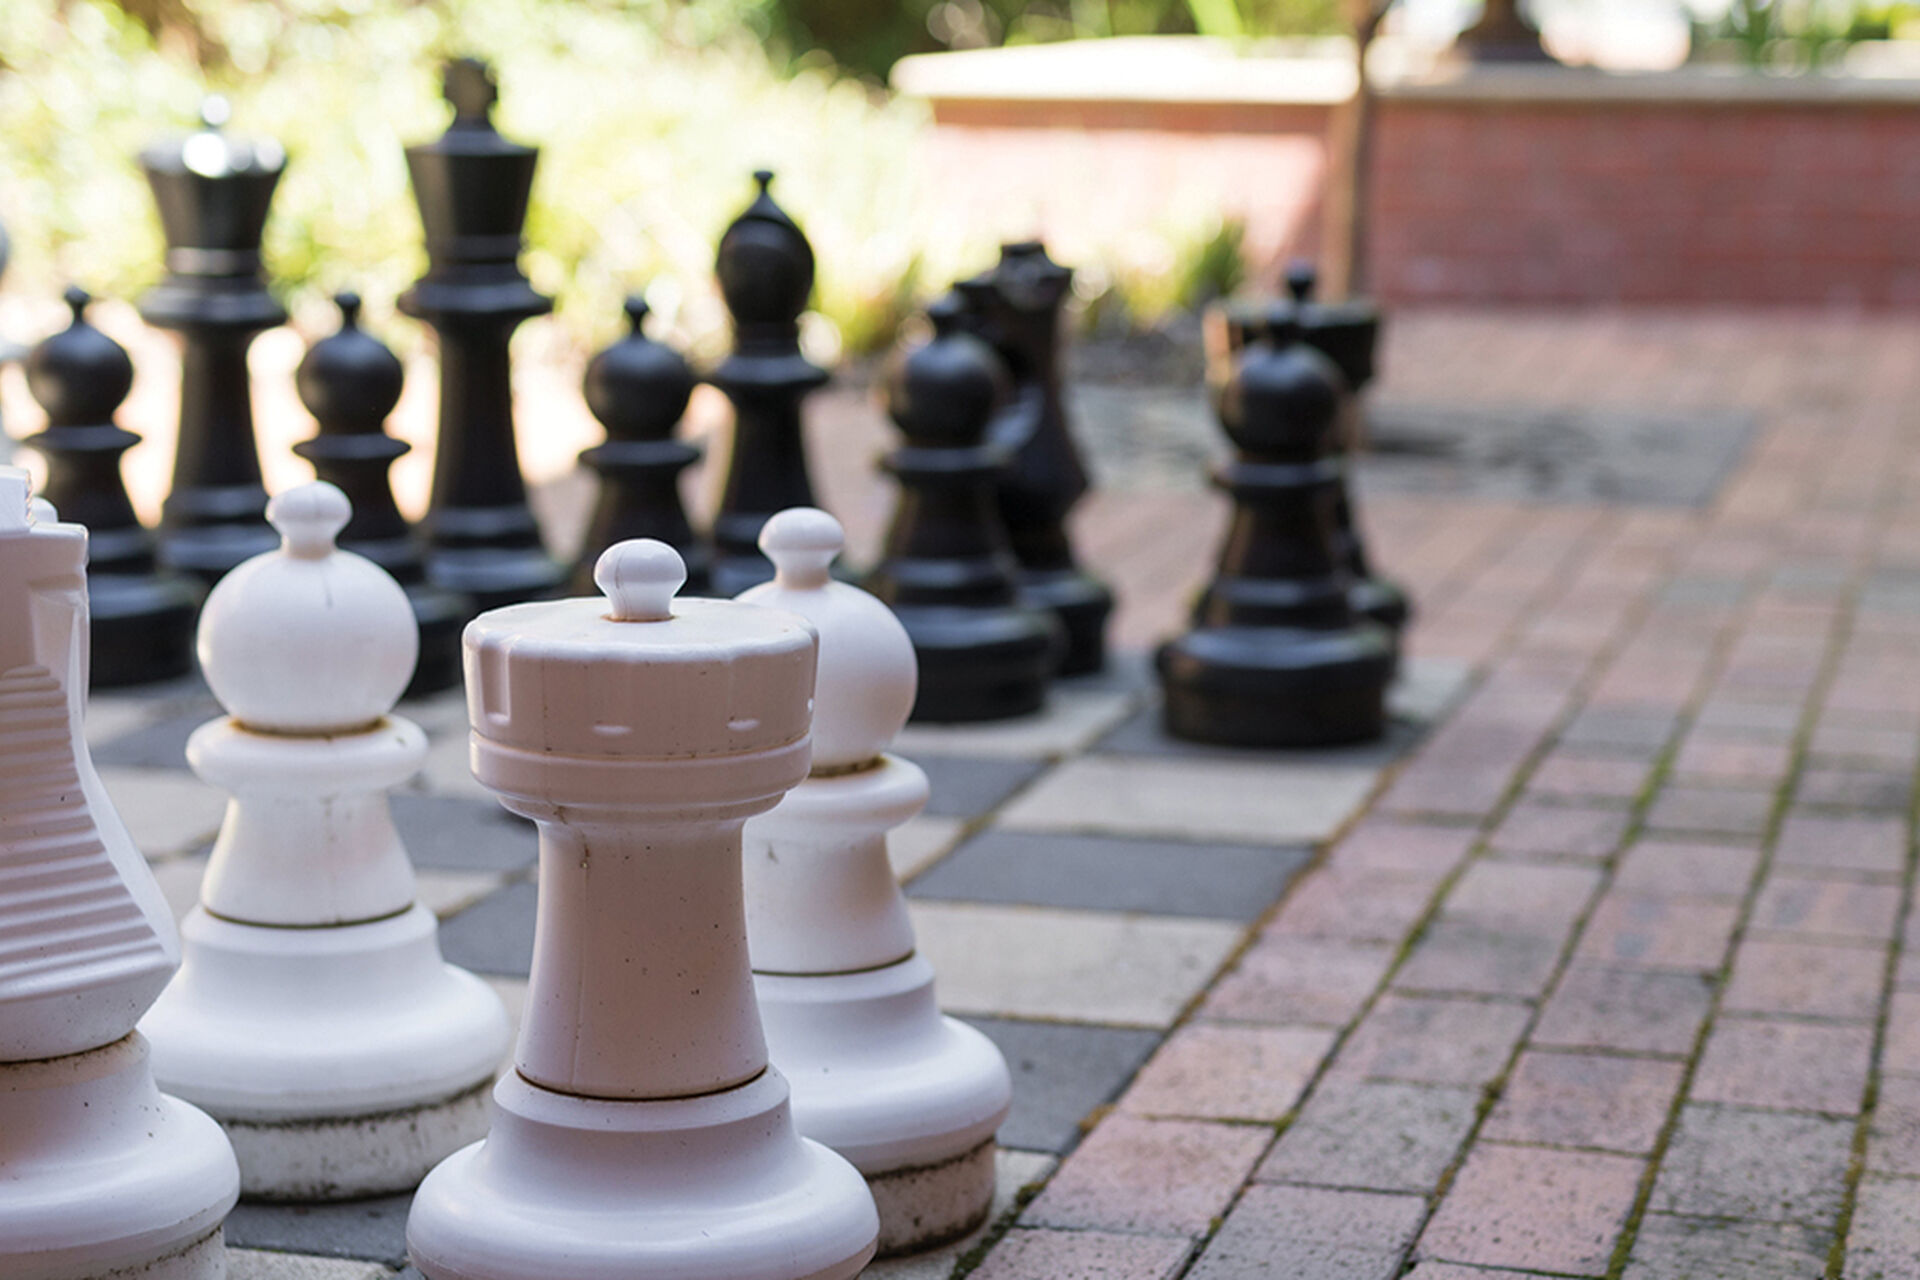 large outdoor chess set for the community at the over 55s retirement village baptistcare Watermark village Wagga Wagga